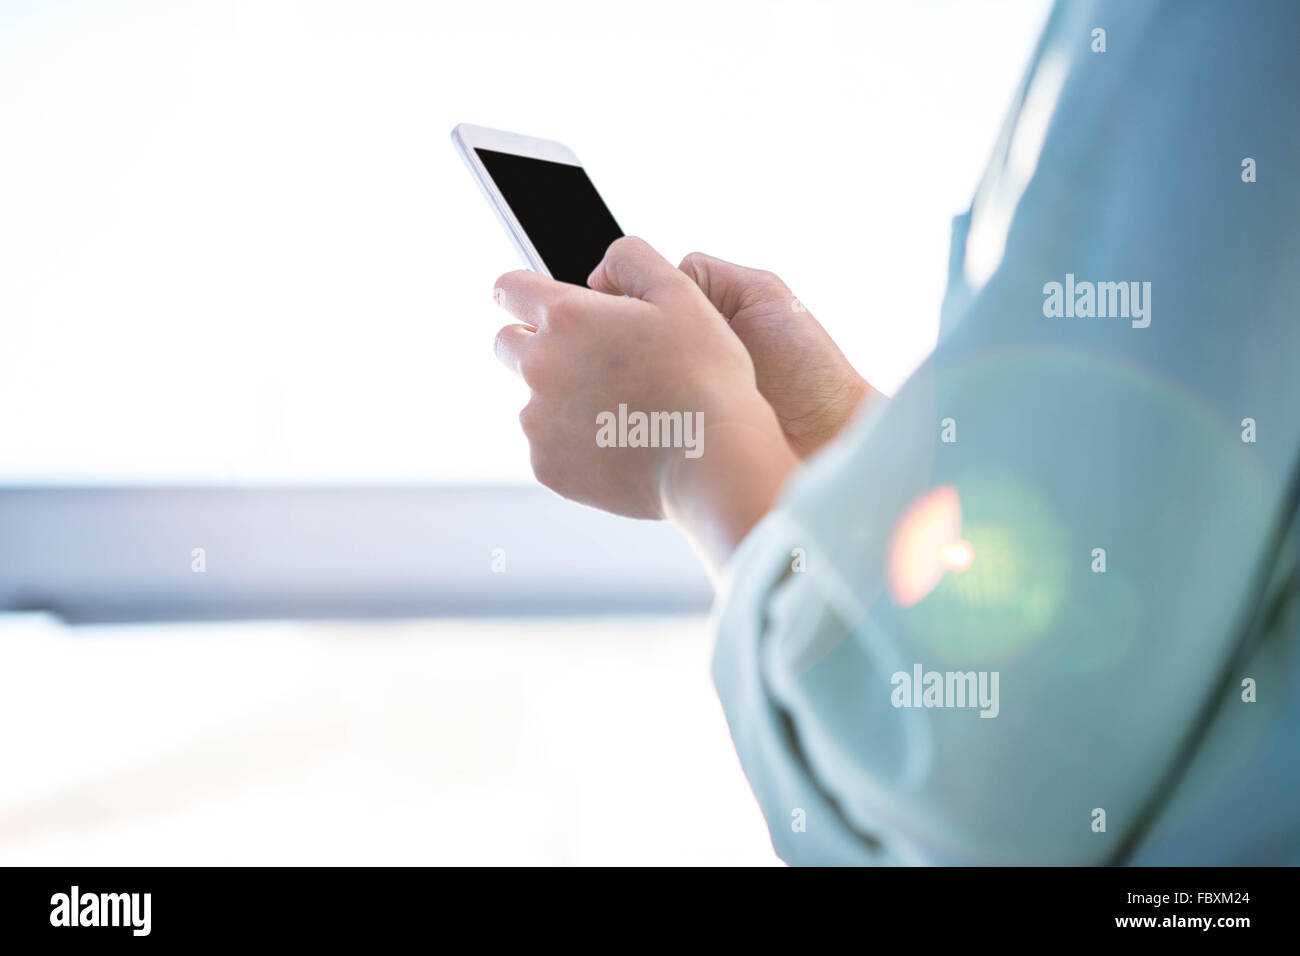 Rear view of a businesswoman using her smartphone Stock Photo